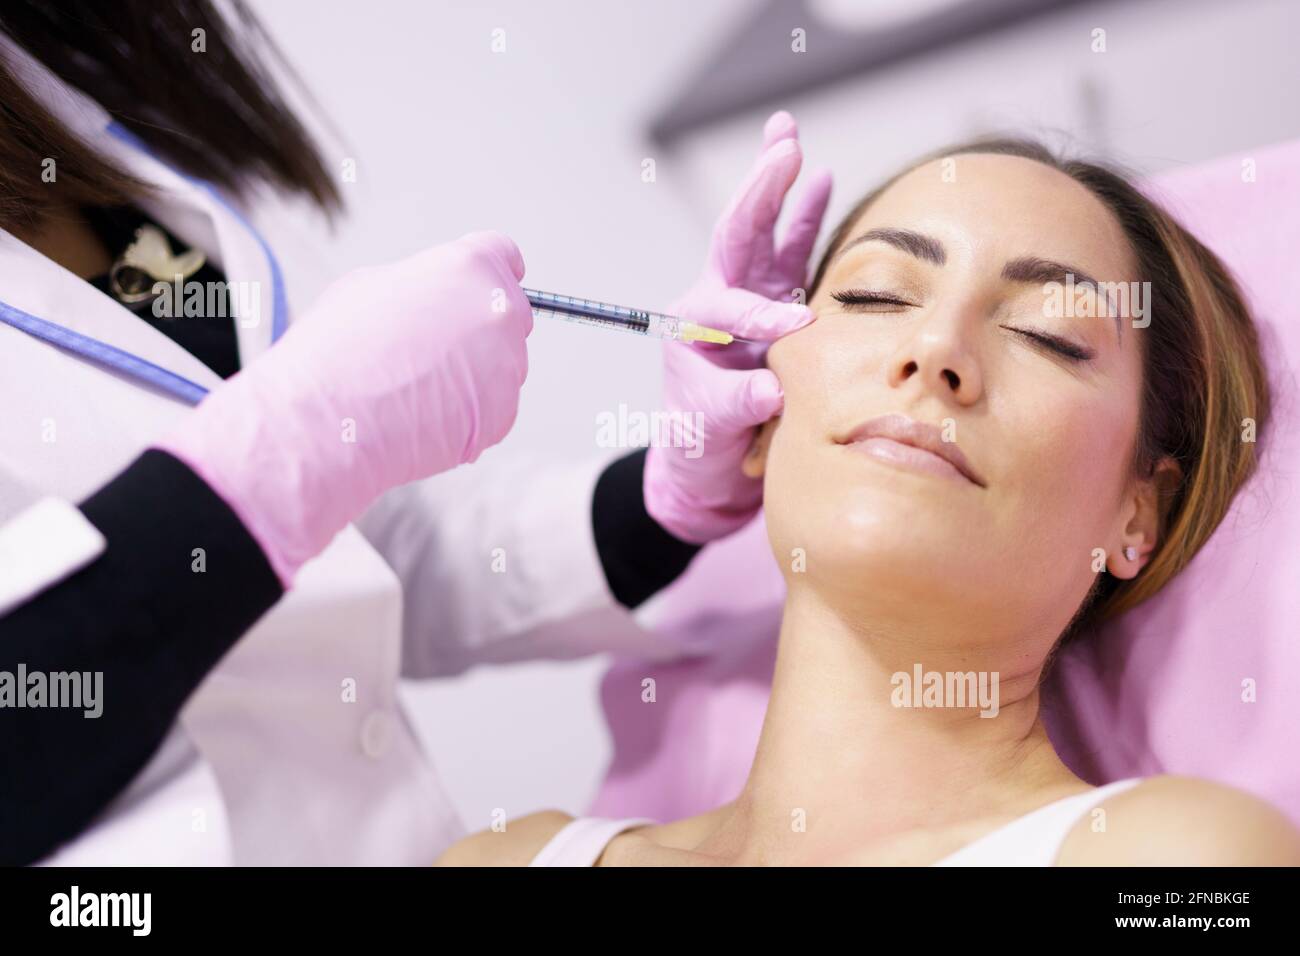 Doctor injecting hyaluronic acid into the cheekbones of a woman as a facial rejuvenation treatment. Stock Photo